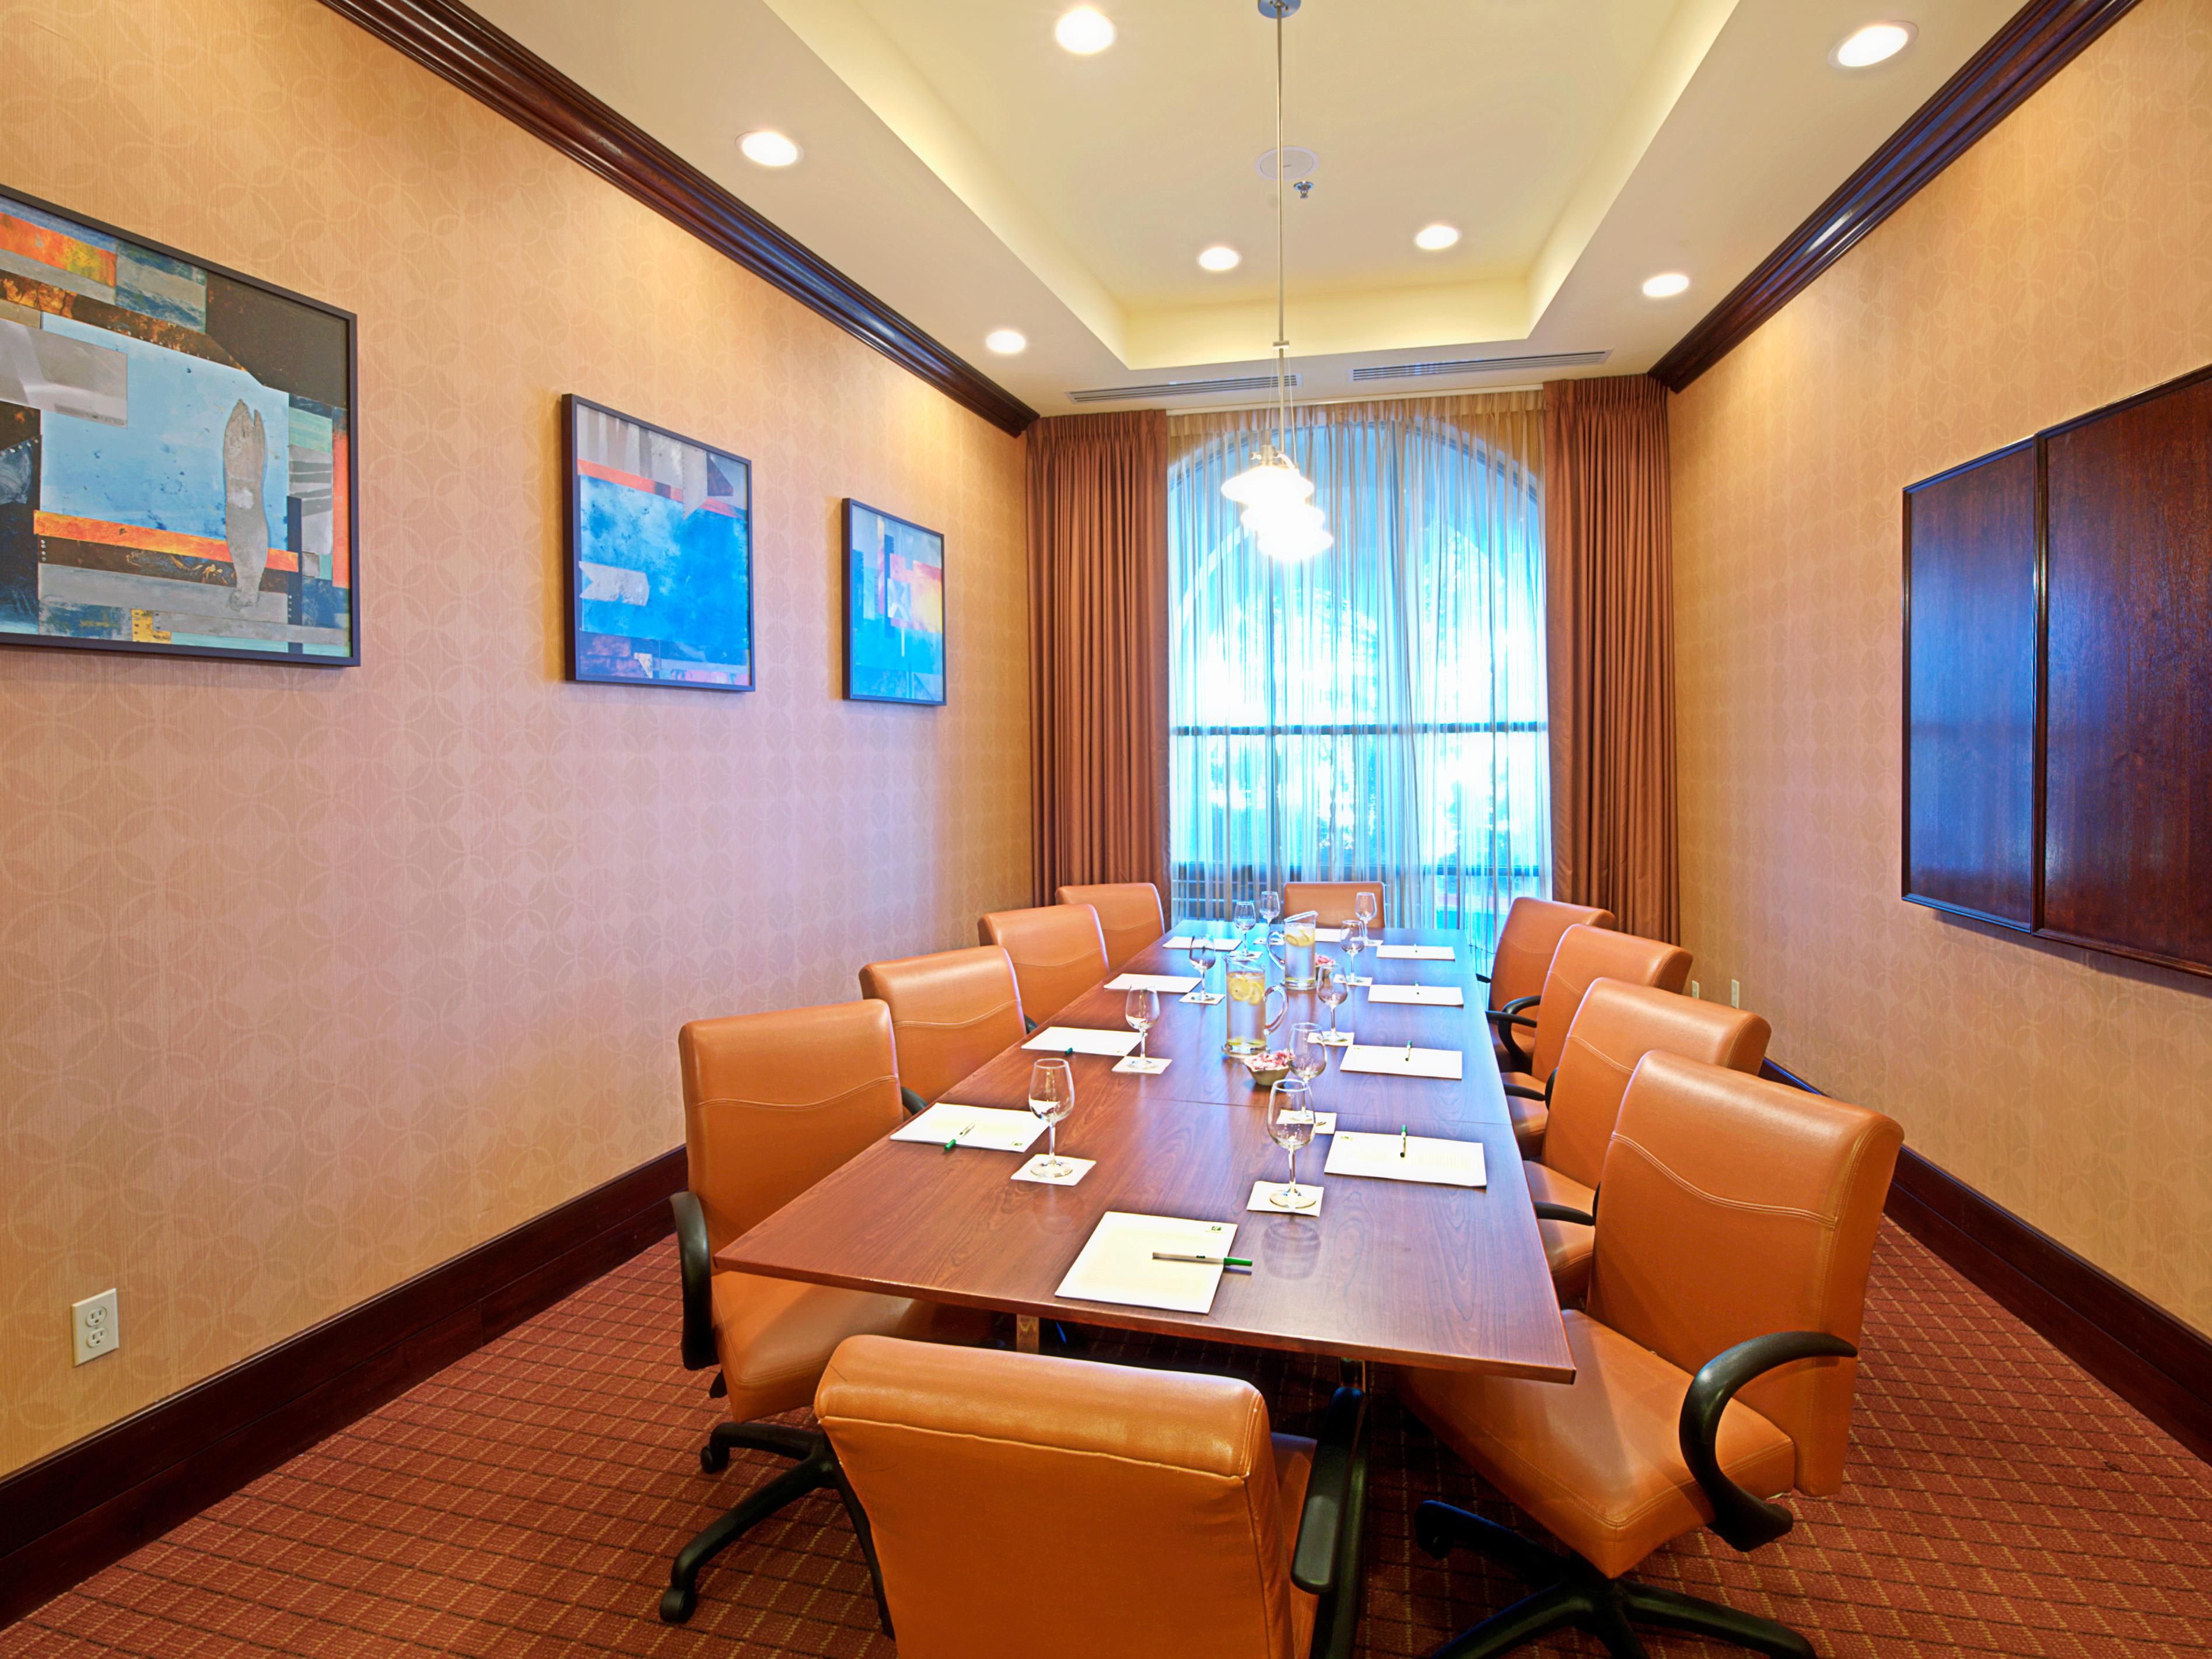 Our Executive Boardroom is a favorite for intimate corporate meetings or company interviews, with complimentary wireless internet, water station, and seating for up to 10 attendees. Audio/Visual equipment, meals, and beverages are all available. For pricing and availability, contact  Sales at alexandro.lazos@aimbridge.com